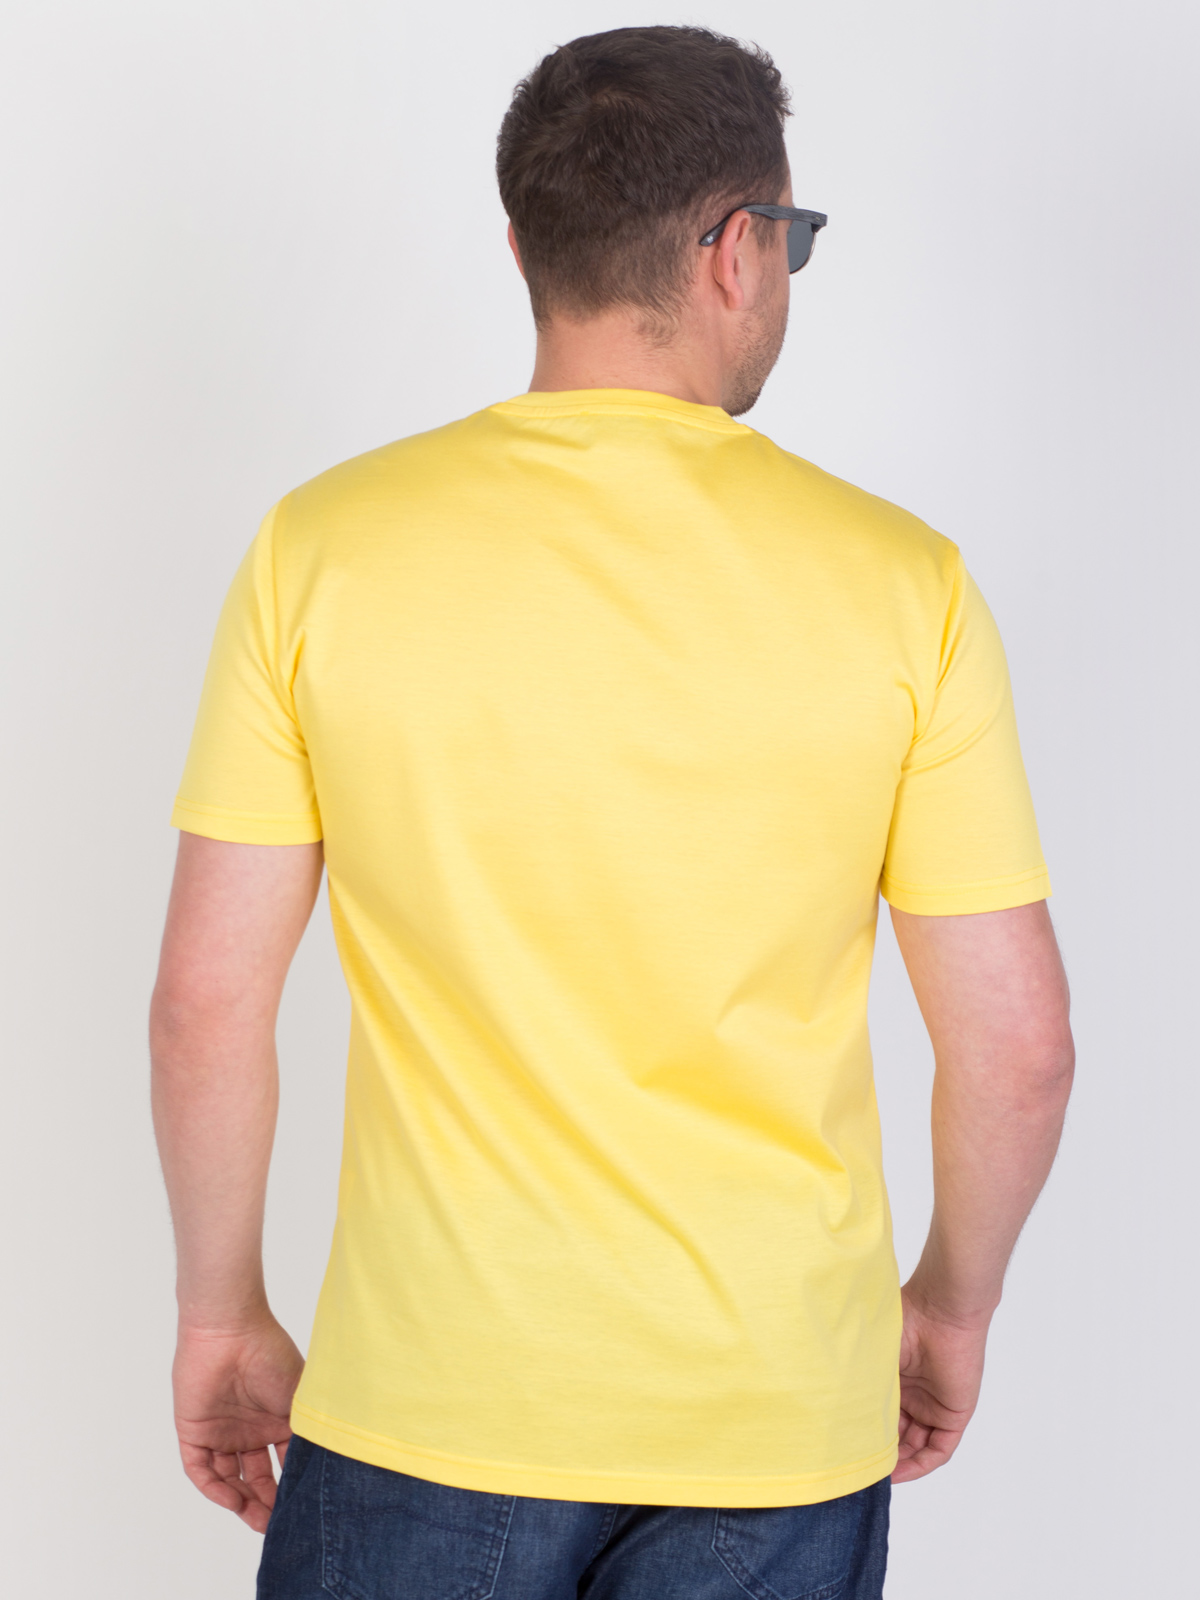 Tshirt in yellow made of mercerized cot - 96431 € 16.31 img4